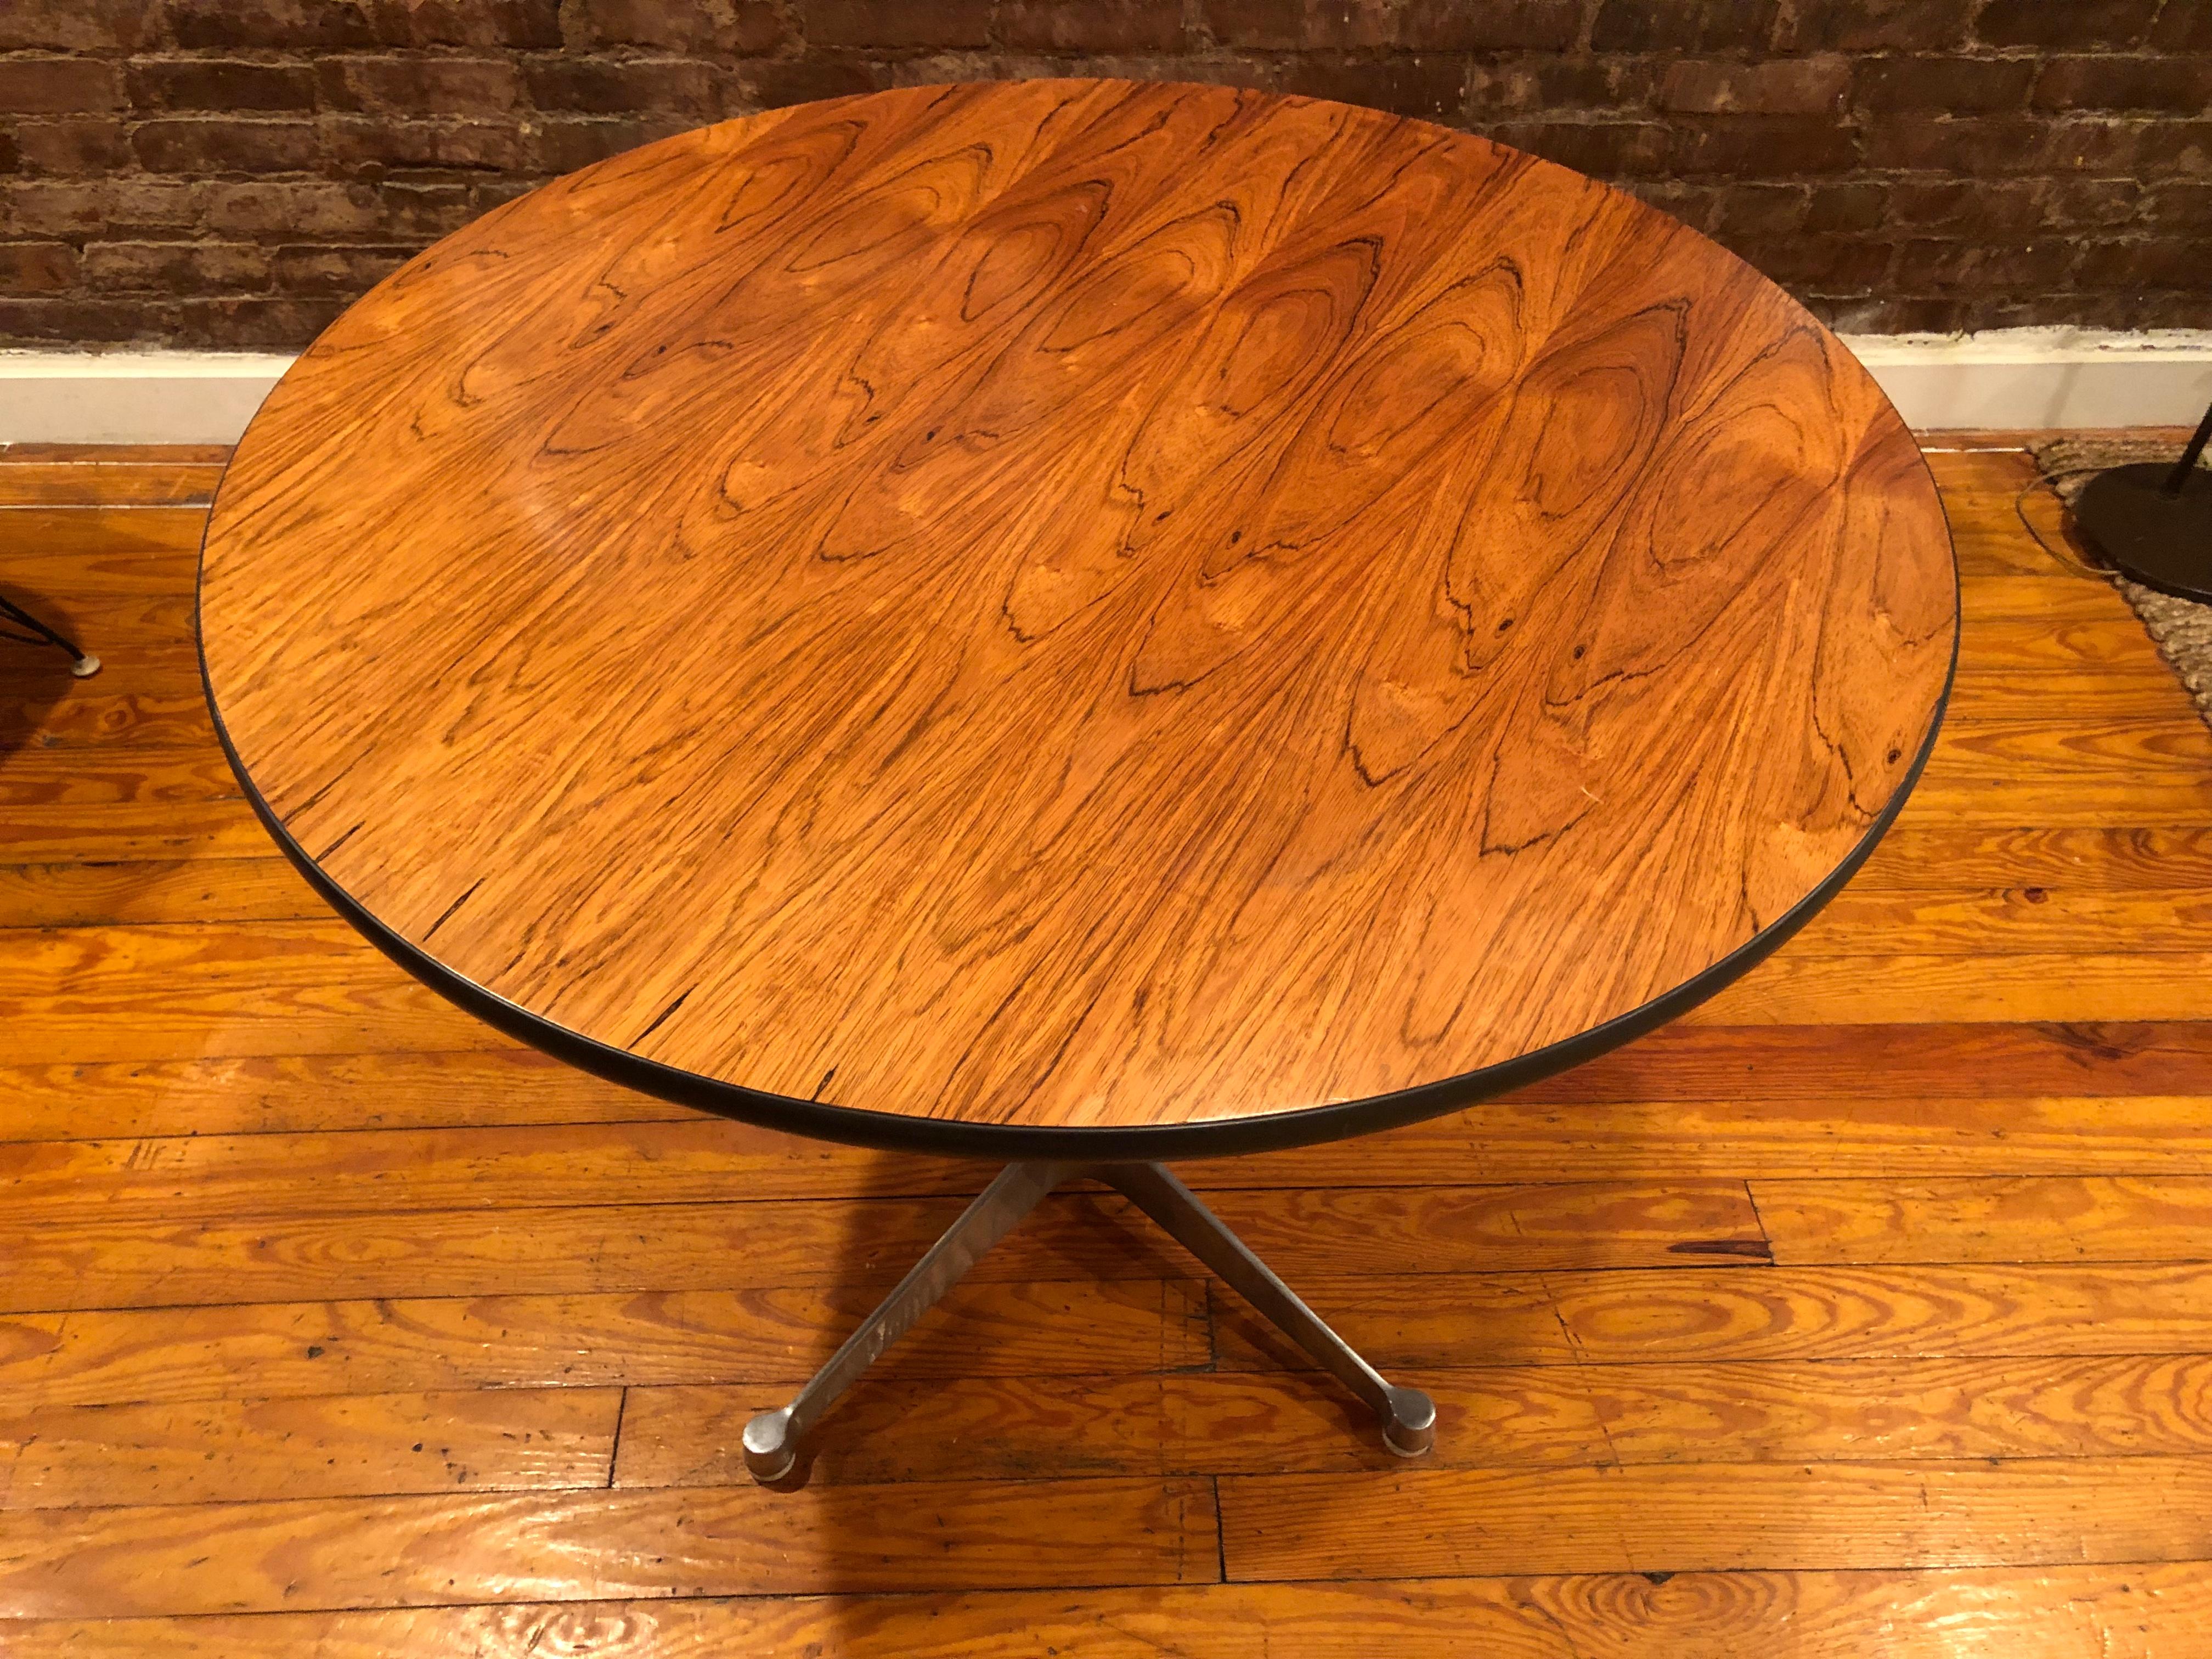 Gorgeous and supremely rare Herman Miller 36 inch dining table in Brazilian rosewood (this wood was discontinued in 1993 due to environmental regulations). The grains are absolutely spectacular and highly figured. The polished aluminum contract base